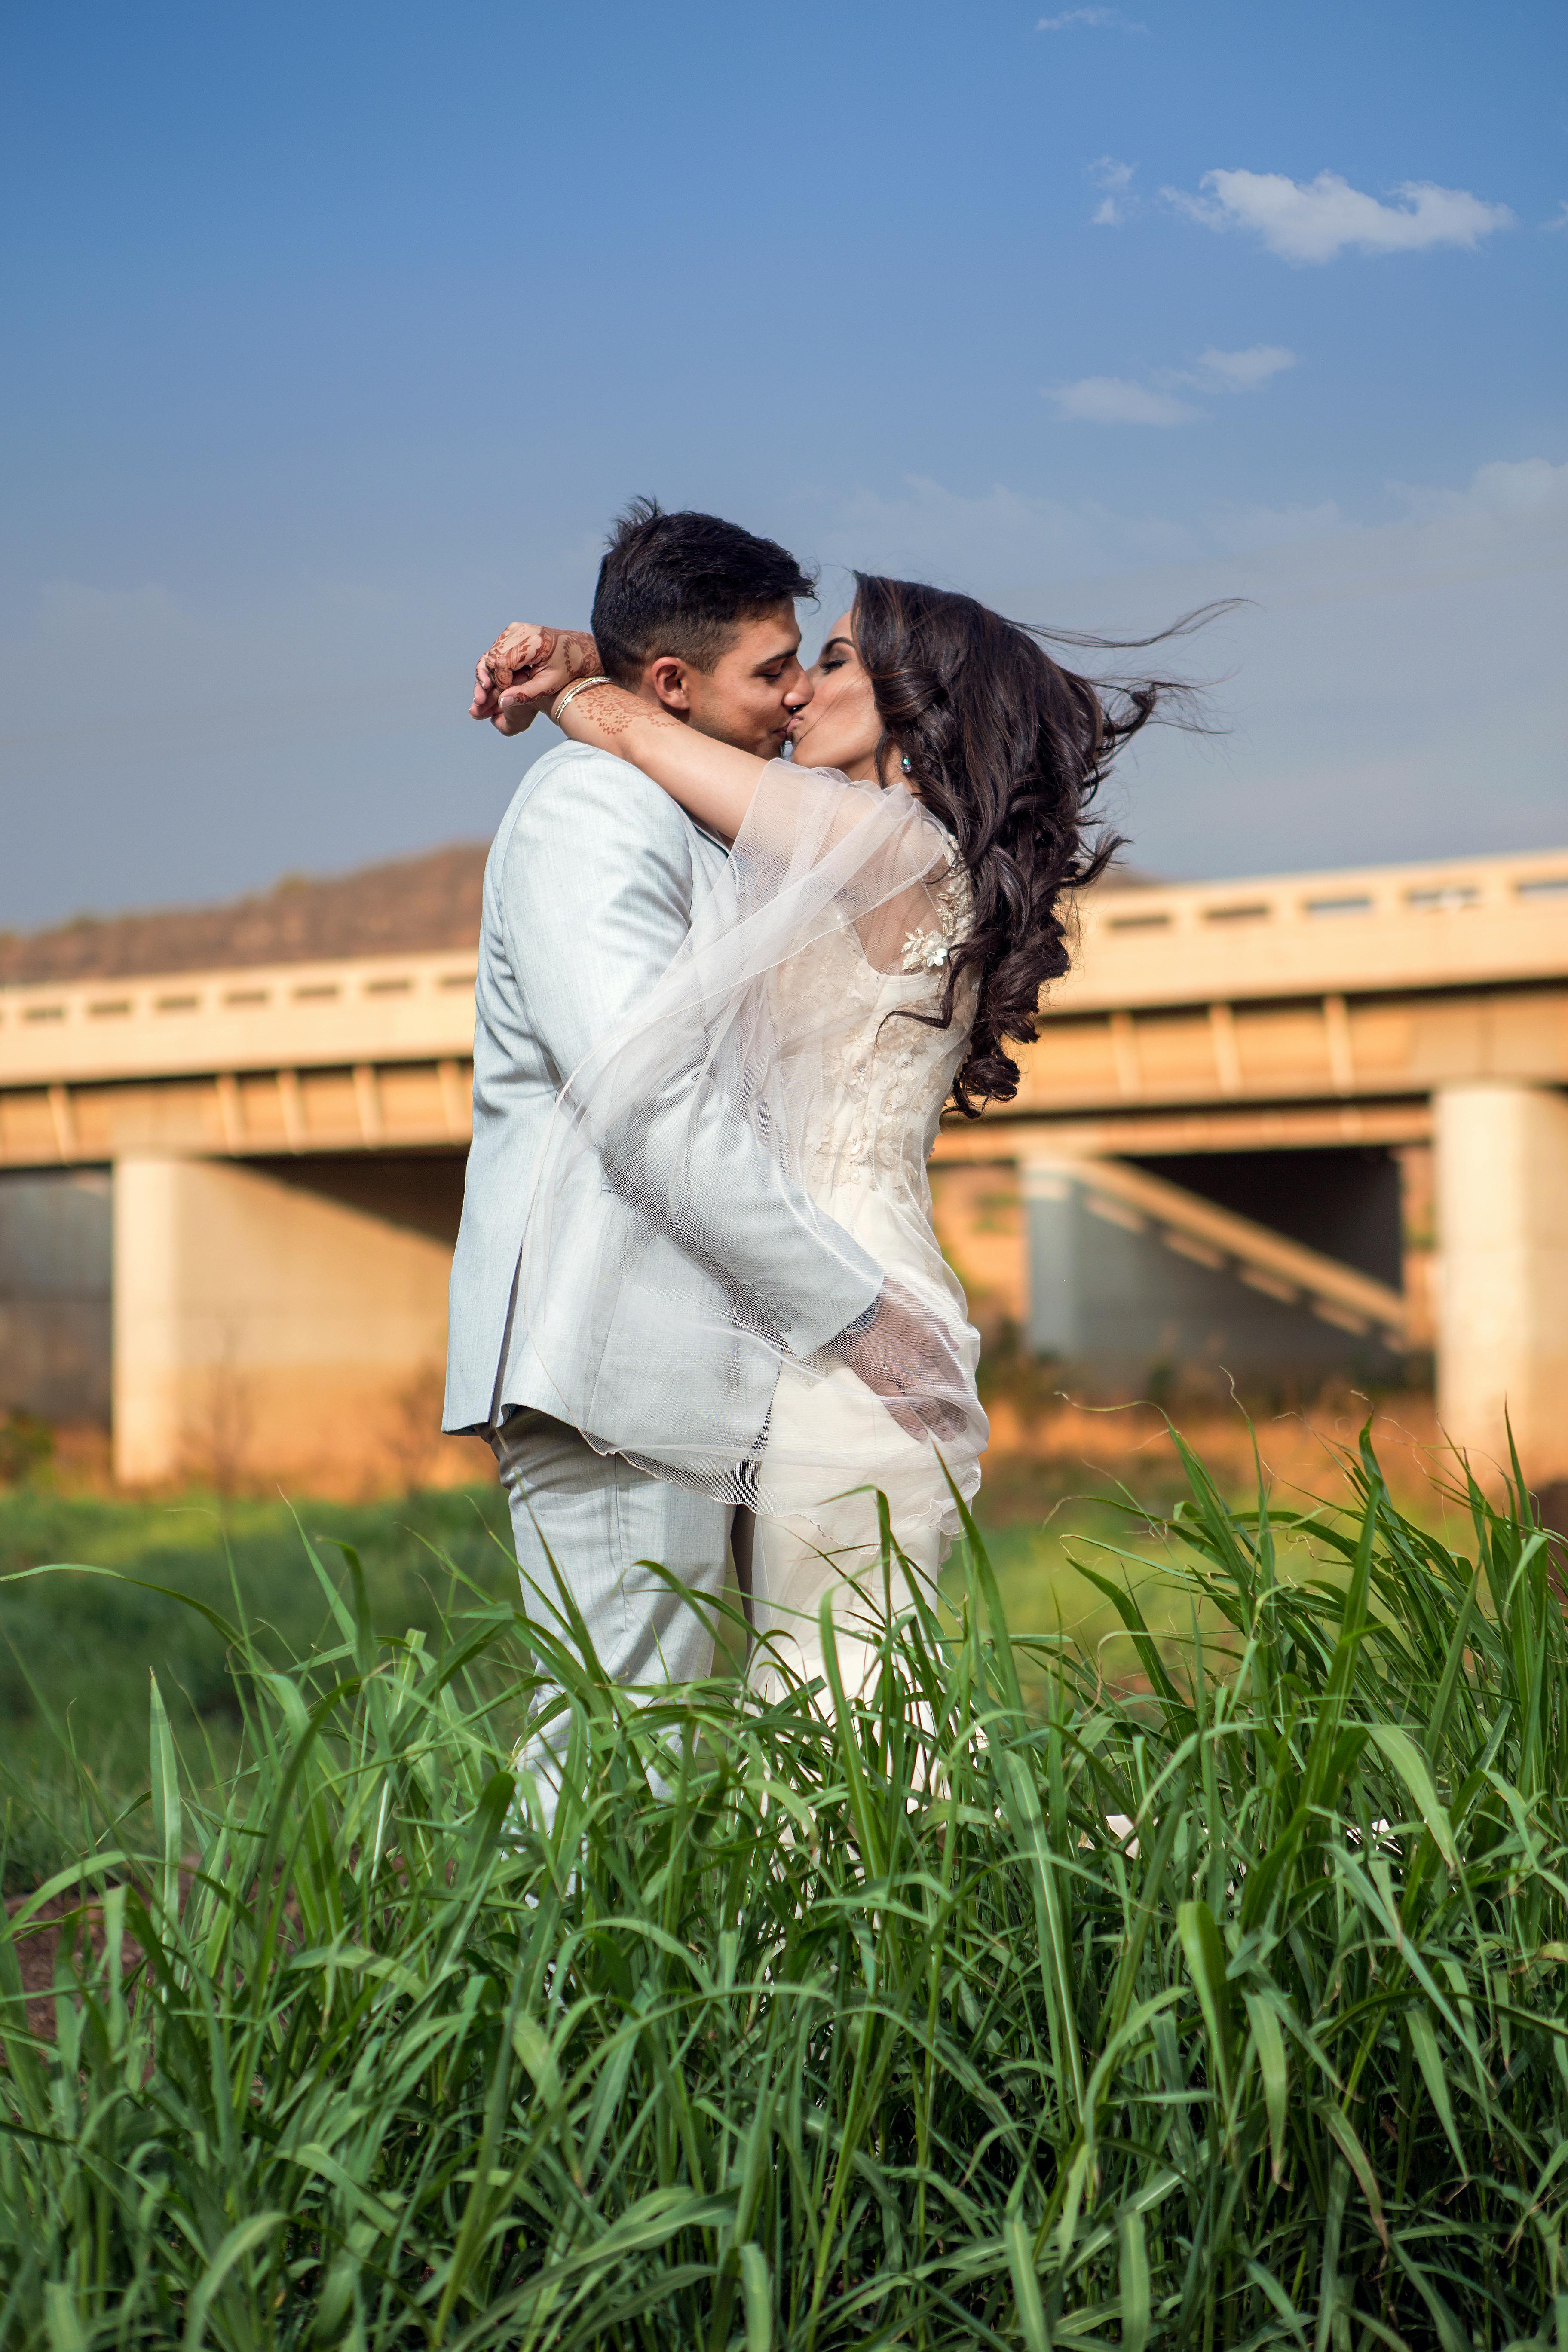 50400 Couple Kissing Romantic Pose Pics Stock Photos Pictures   RoyaltyFree Images  iStock